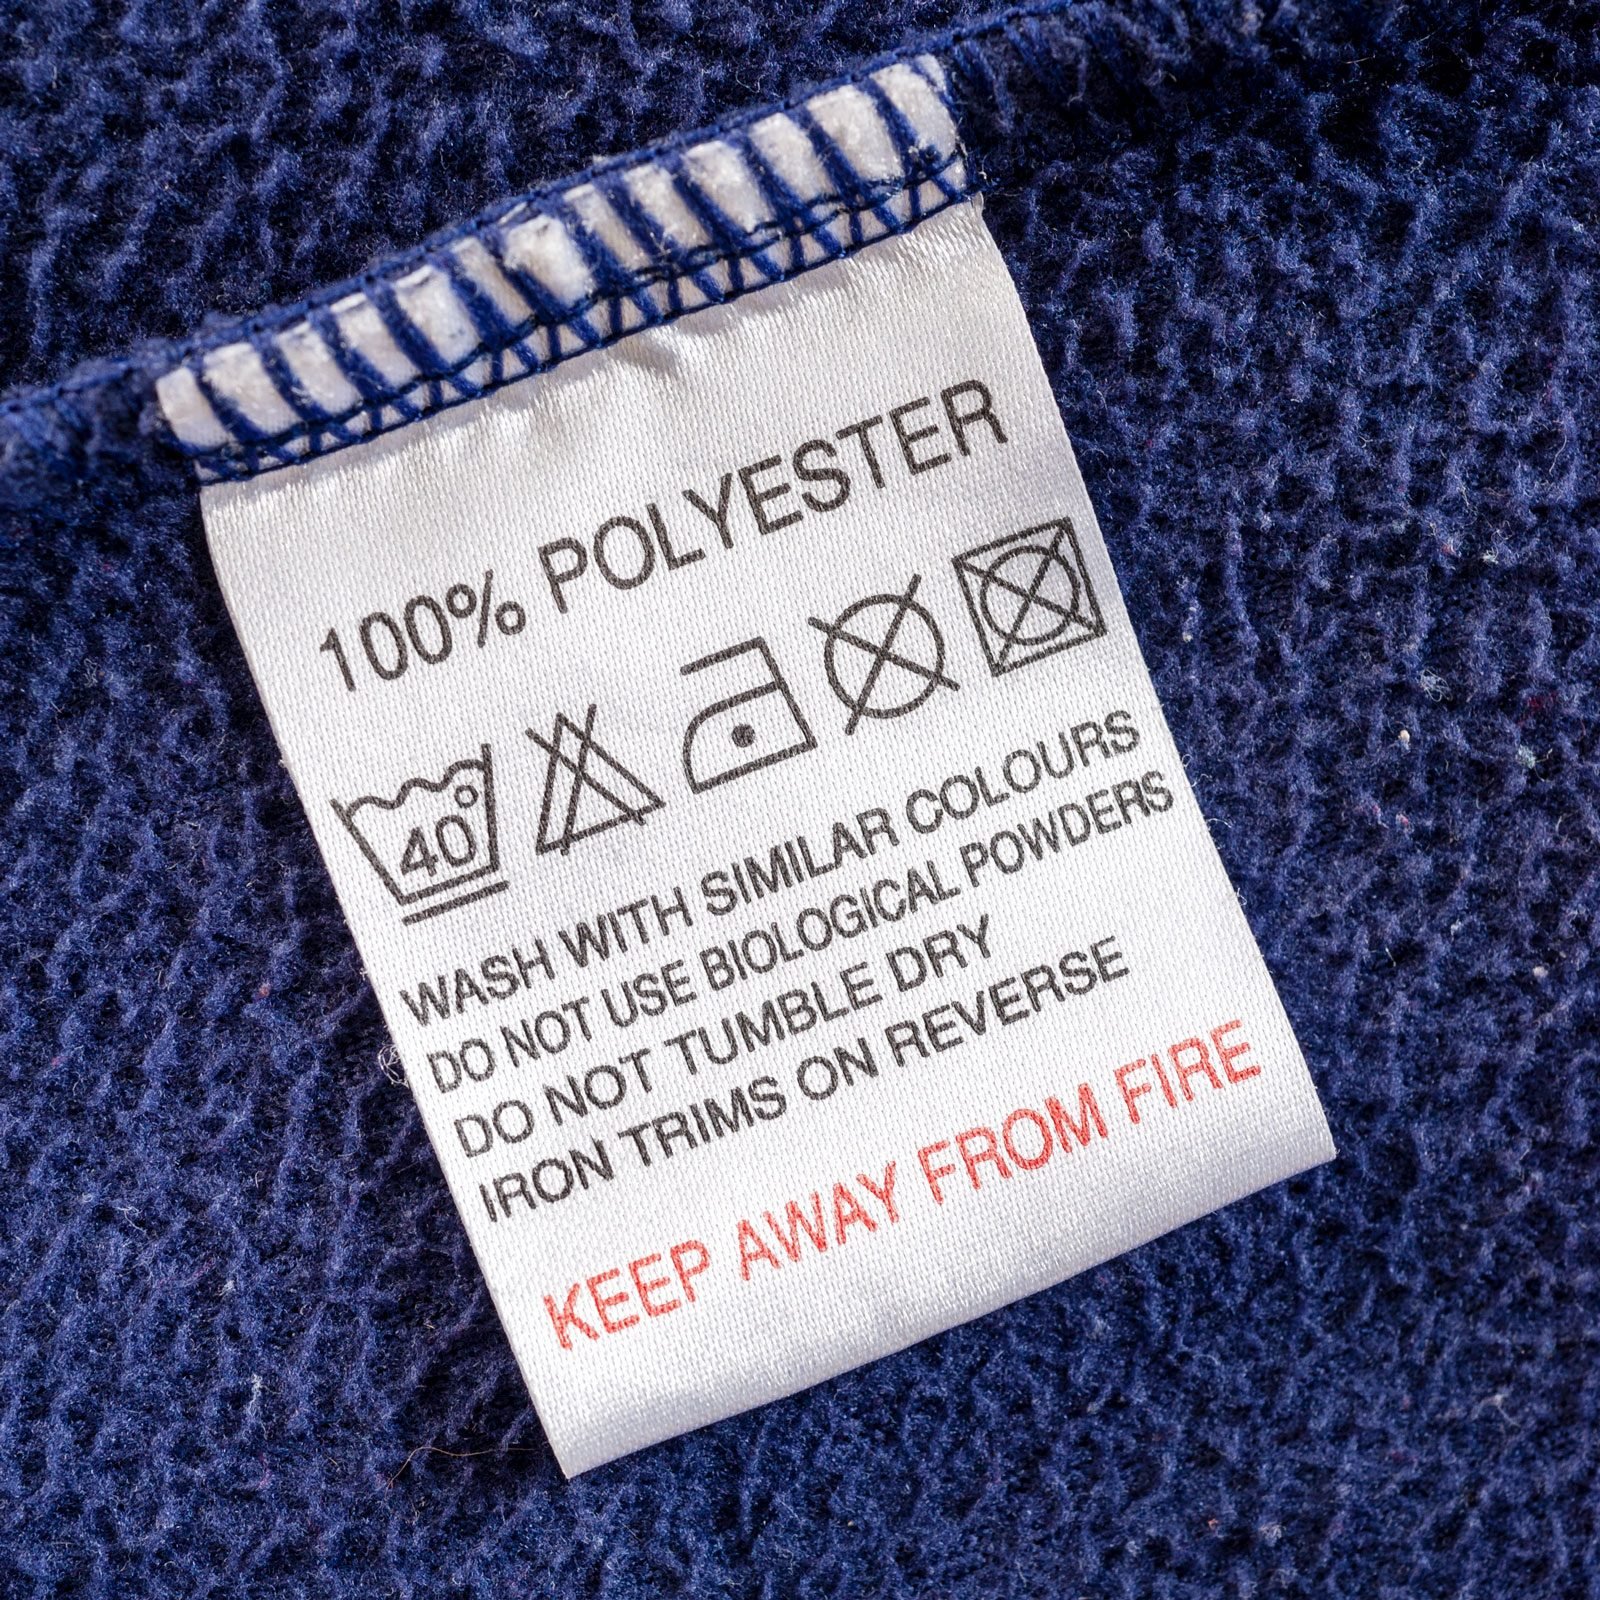 How to Care for Polyester Garments